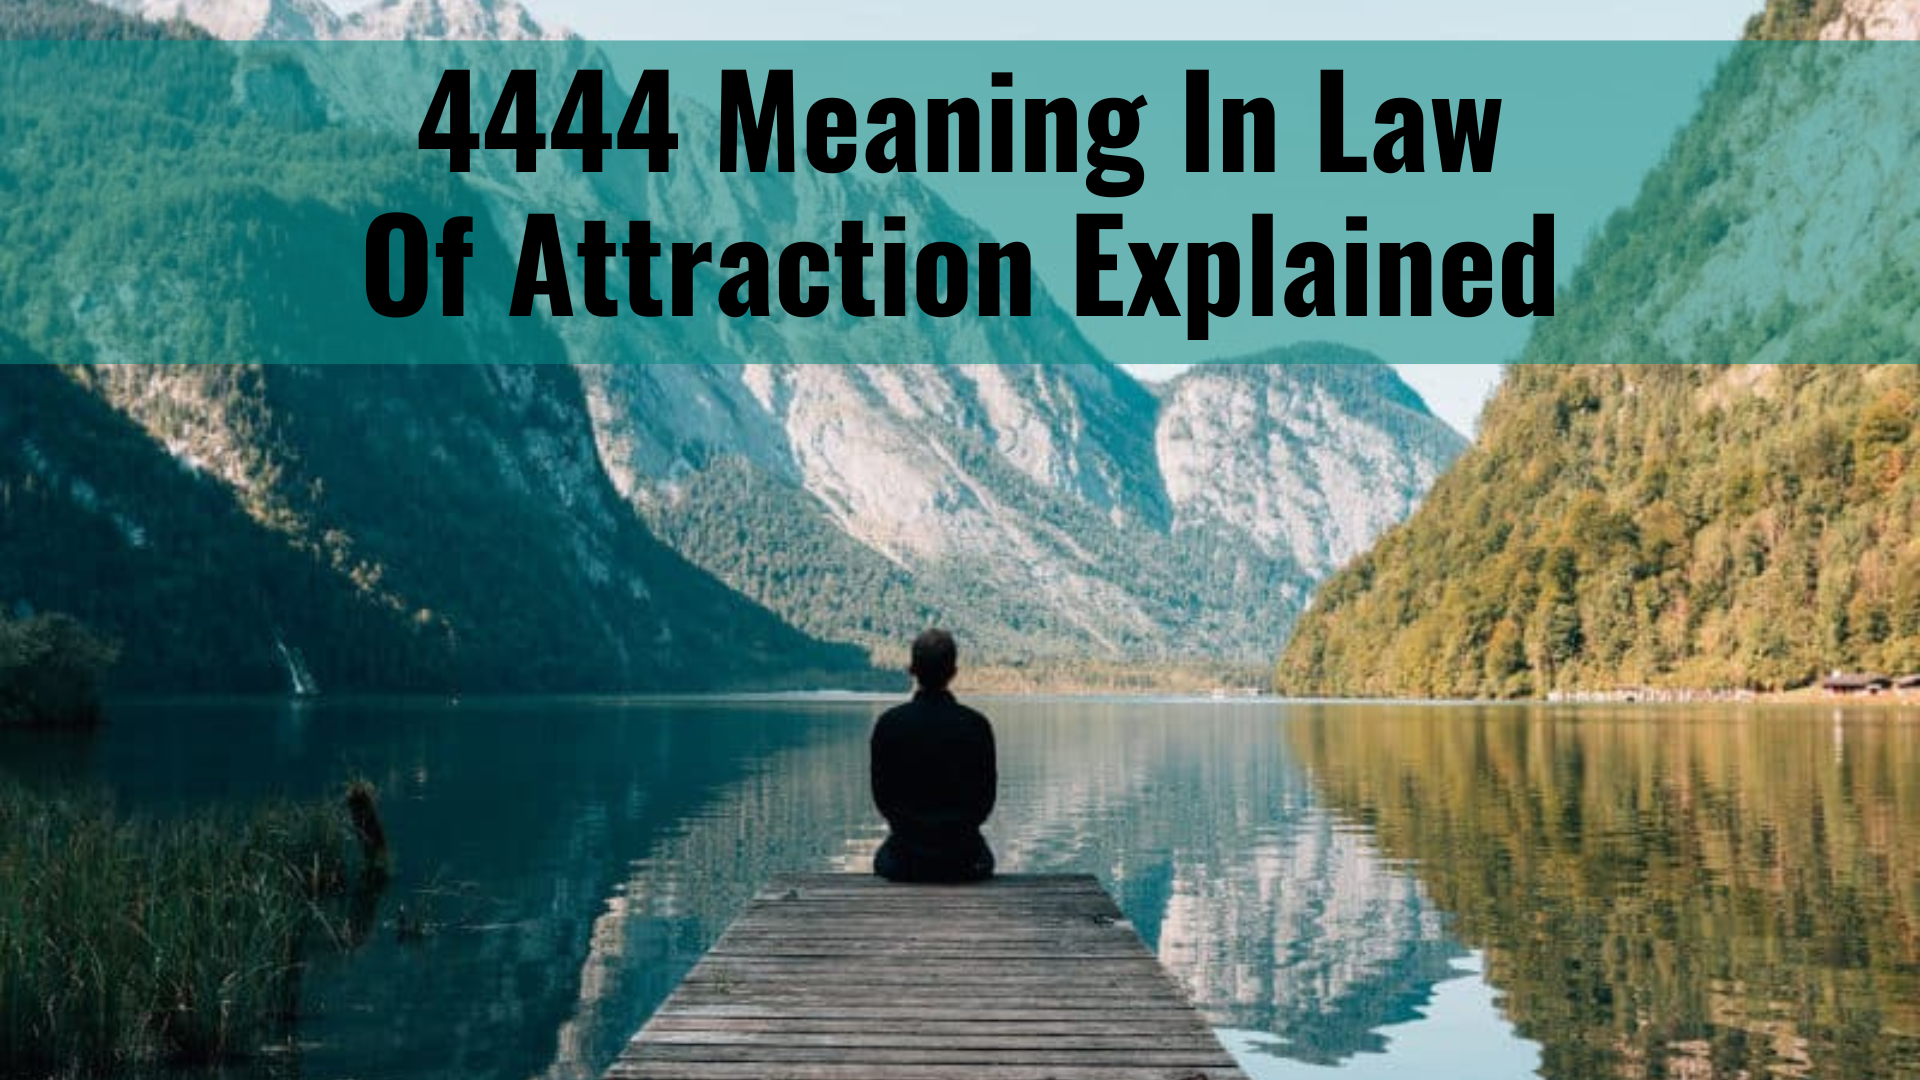 A man sitting while in front of the lake and mountains with words 4444 Meaning In Law Of Attraction Explained